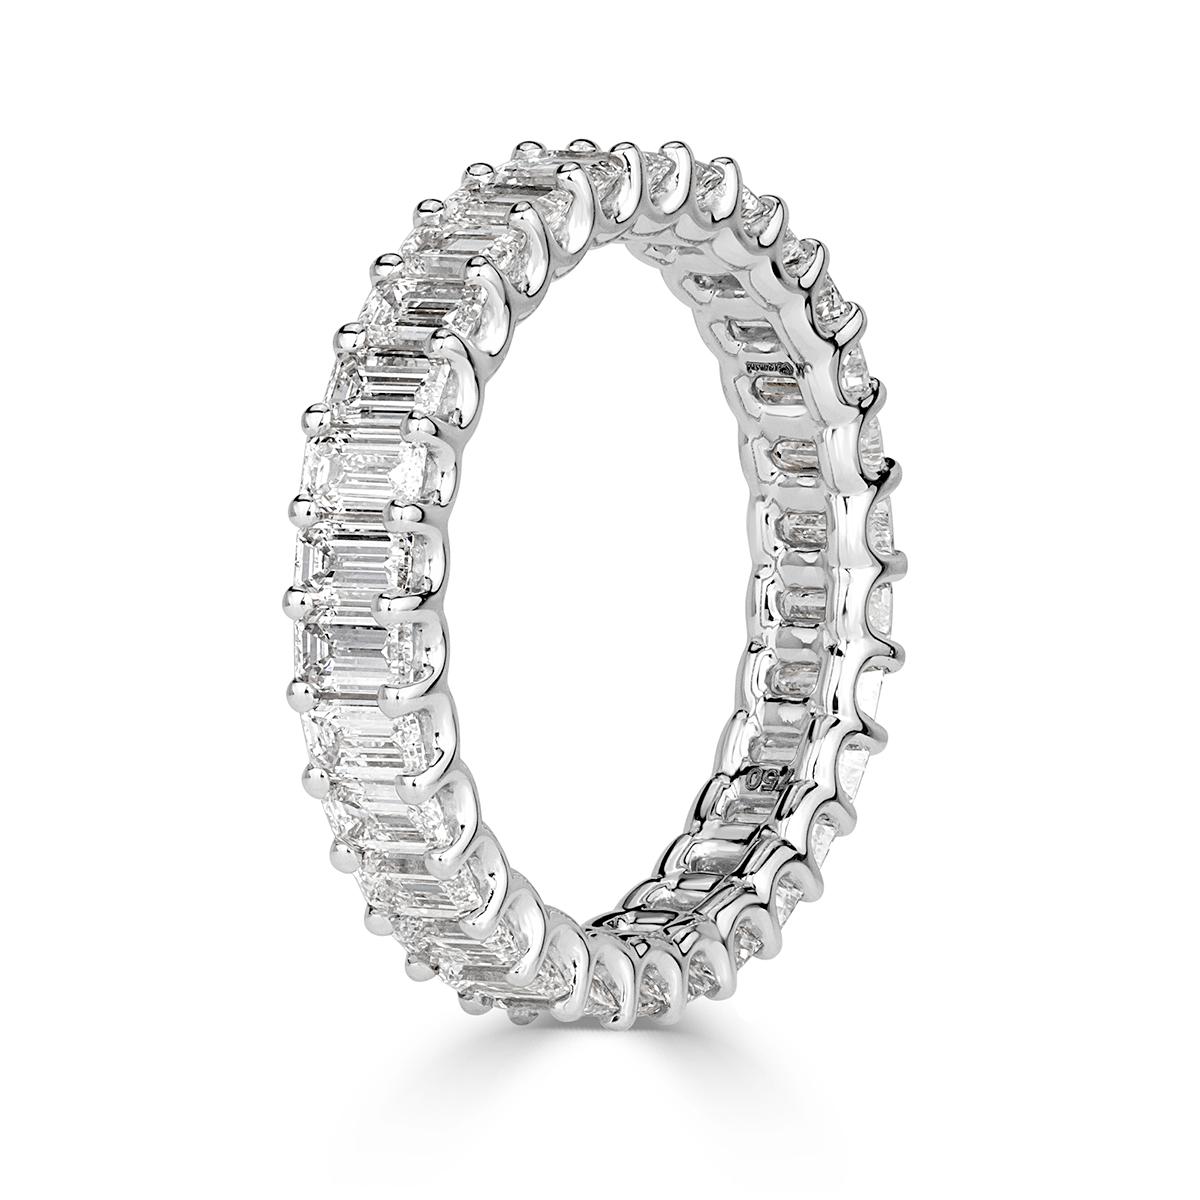 Created in 18k white gold, this ravishing diamond eternity band showcases 2.66ct of emerald cutdiamonds graded at E-F, VVS2-VS1. They are each hand selected and set in a 